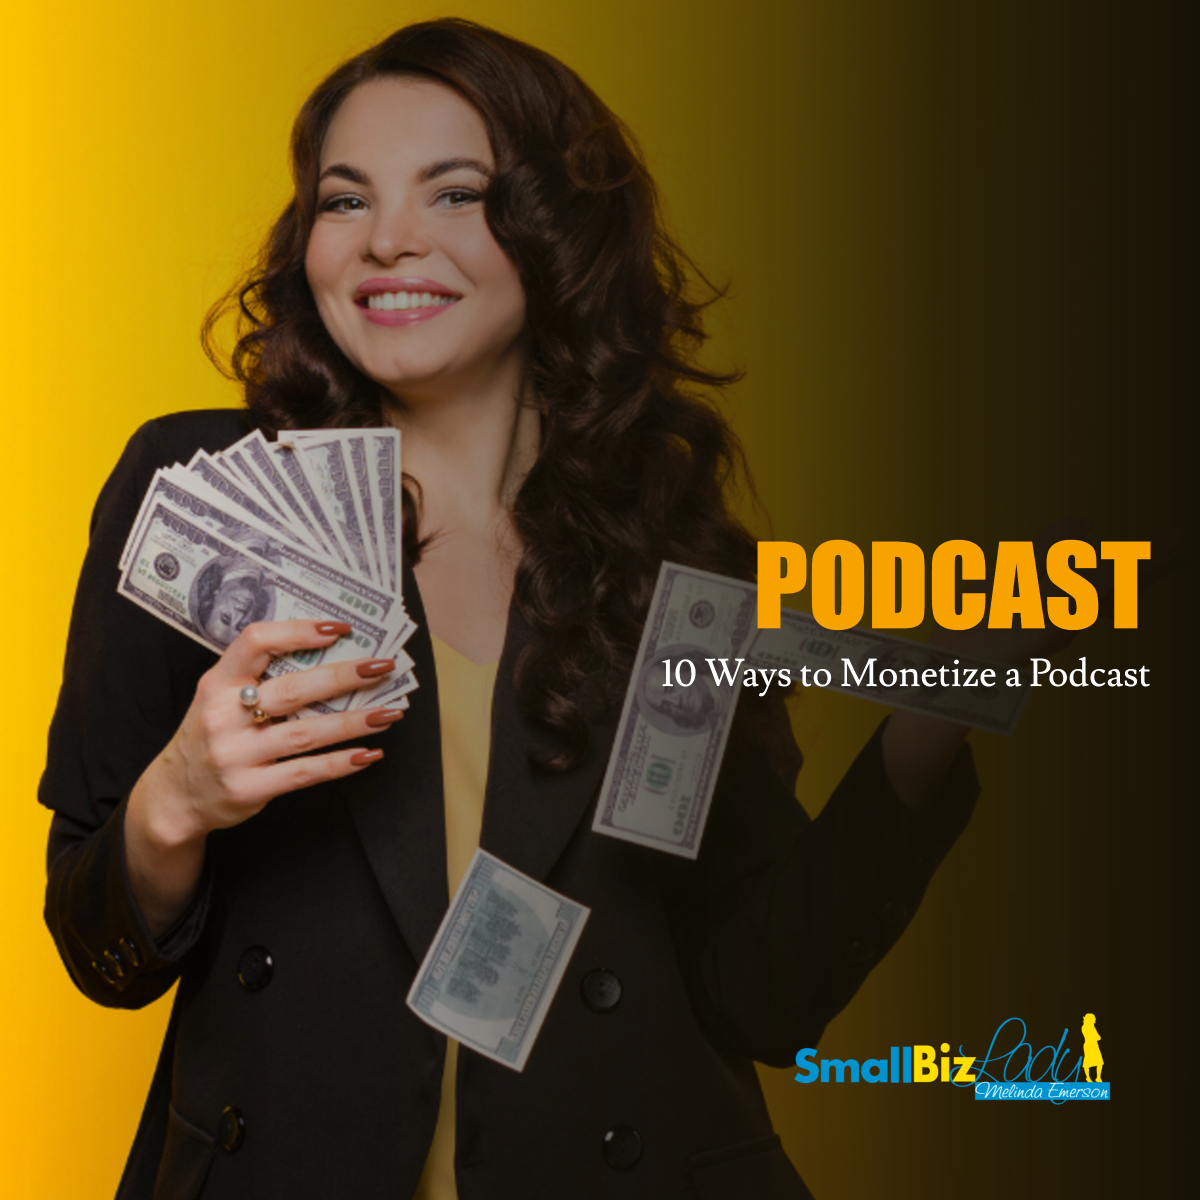 10 Ways to Monetize a Podcast social image